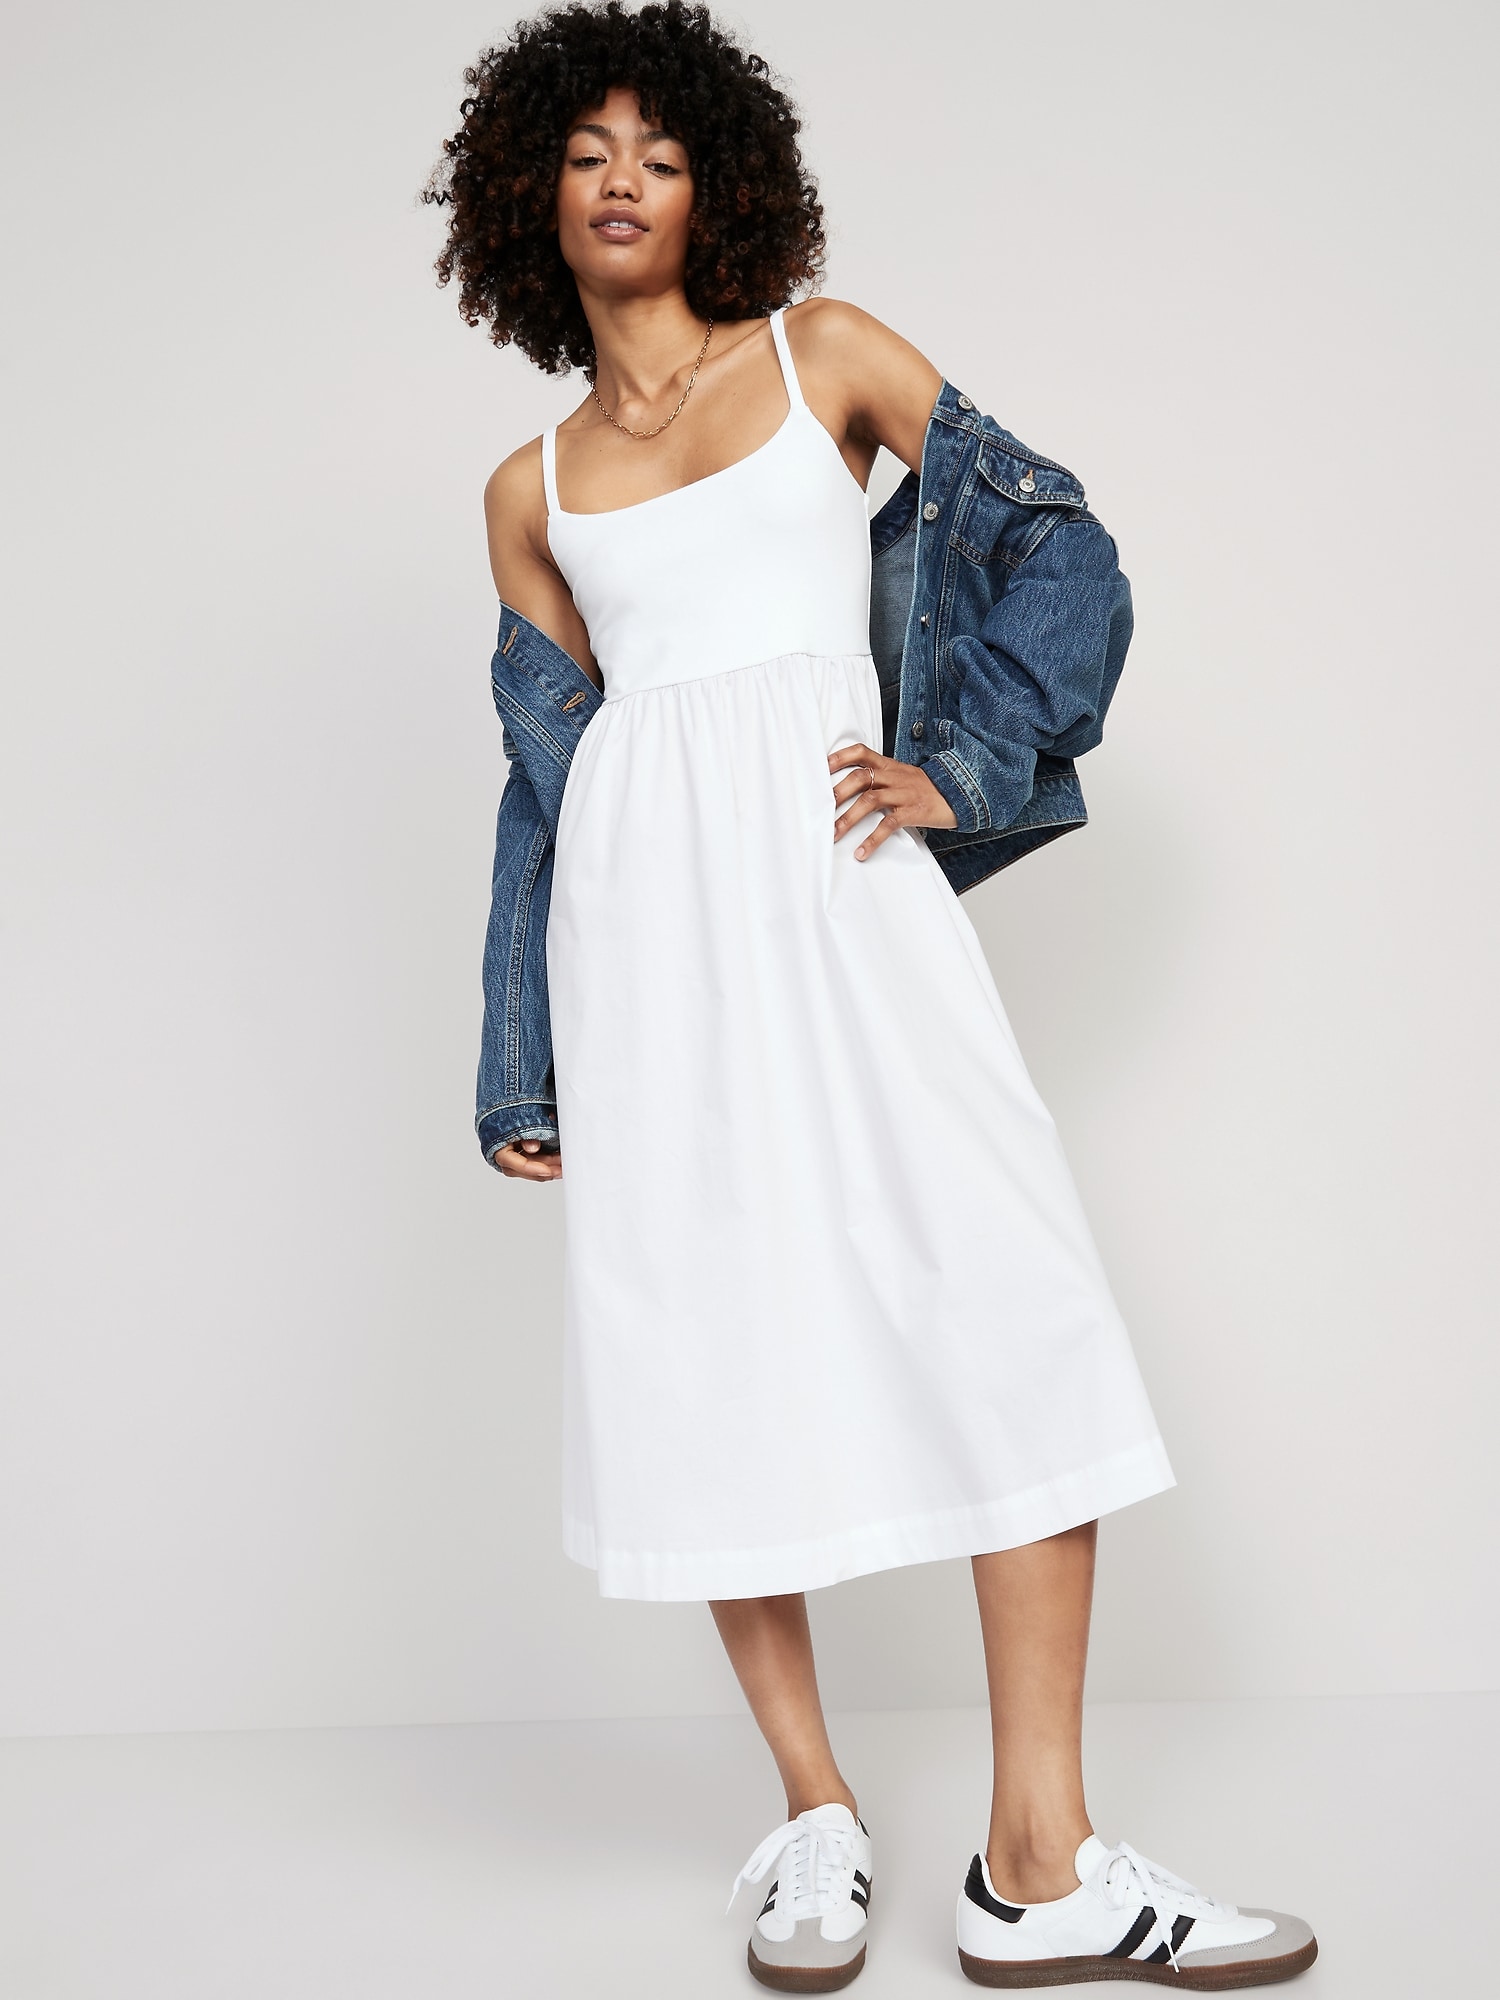 LIKELY Cami Dress in White